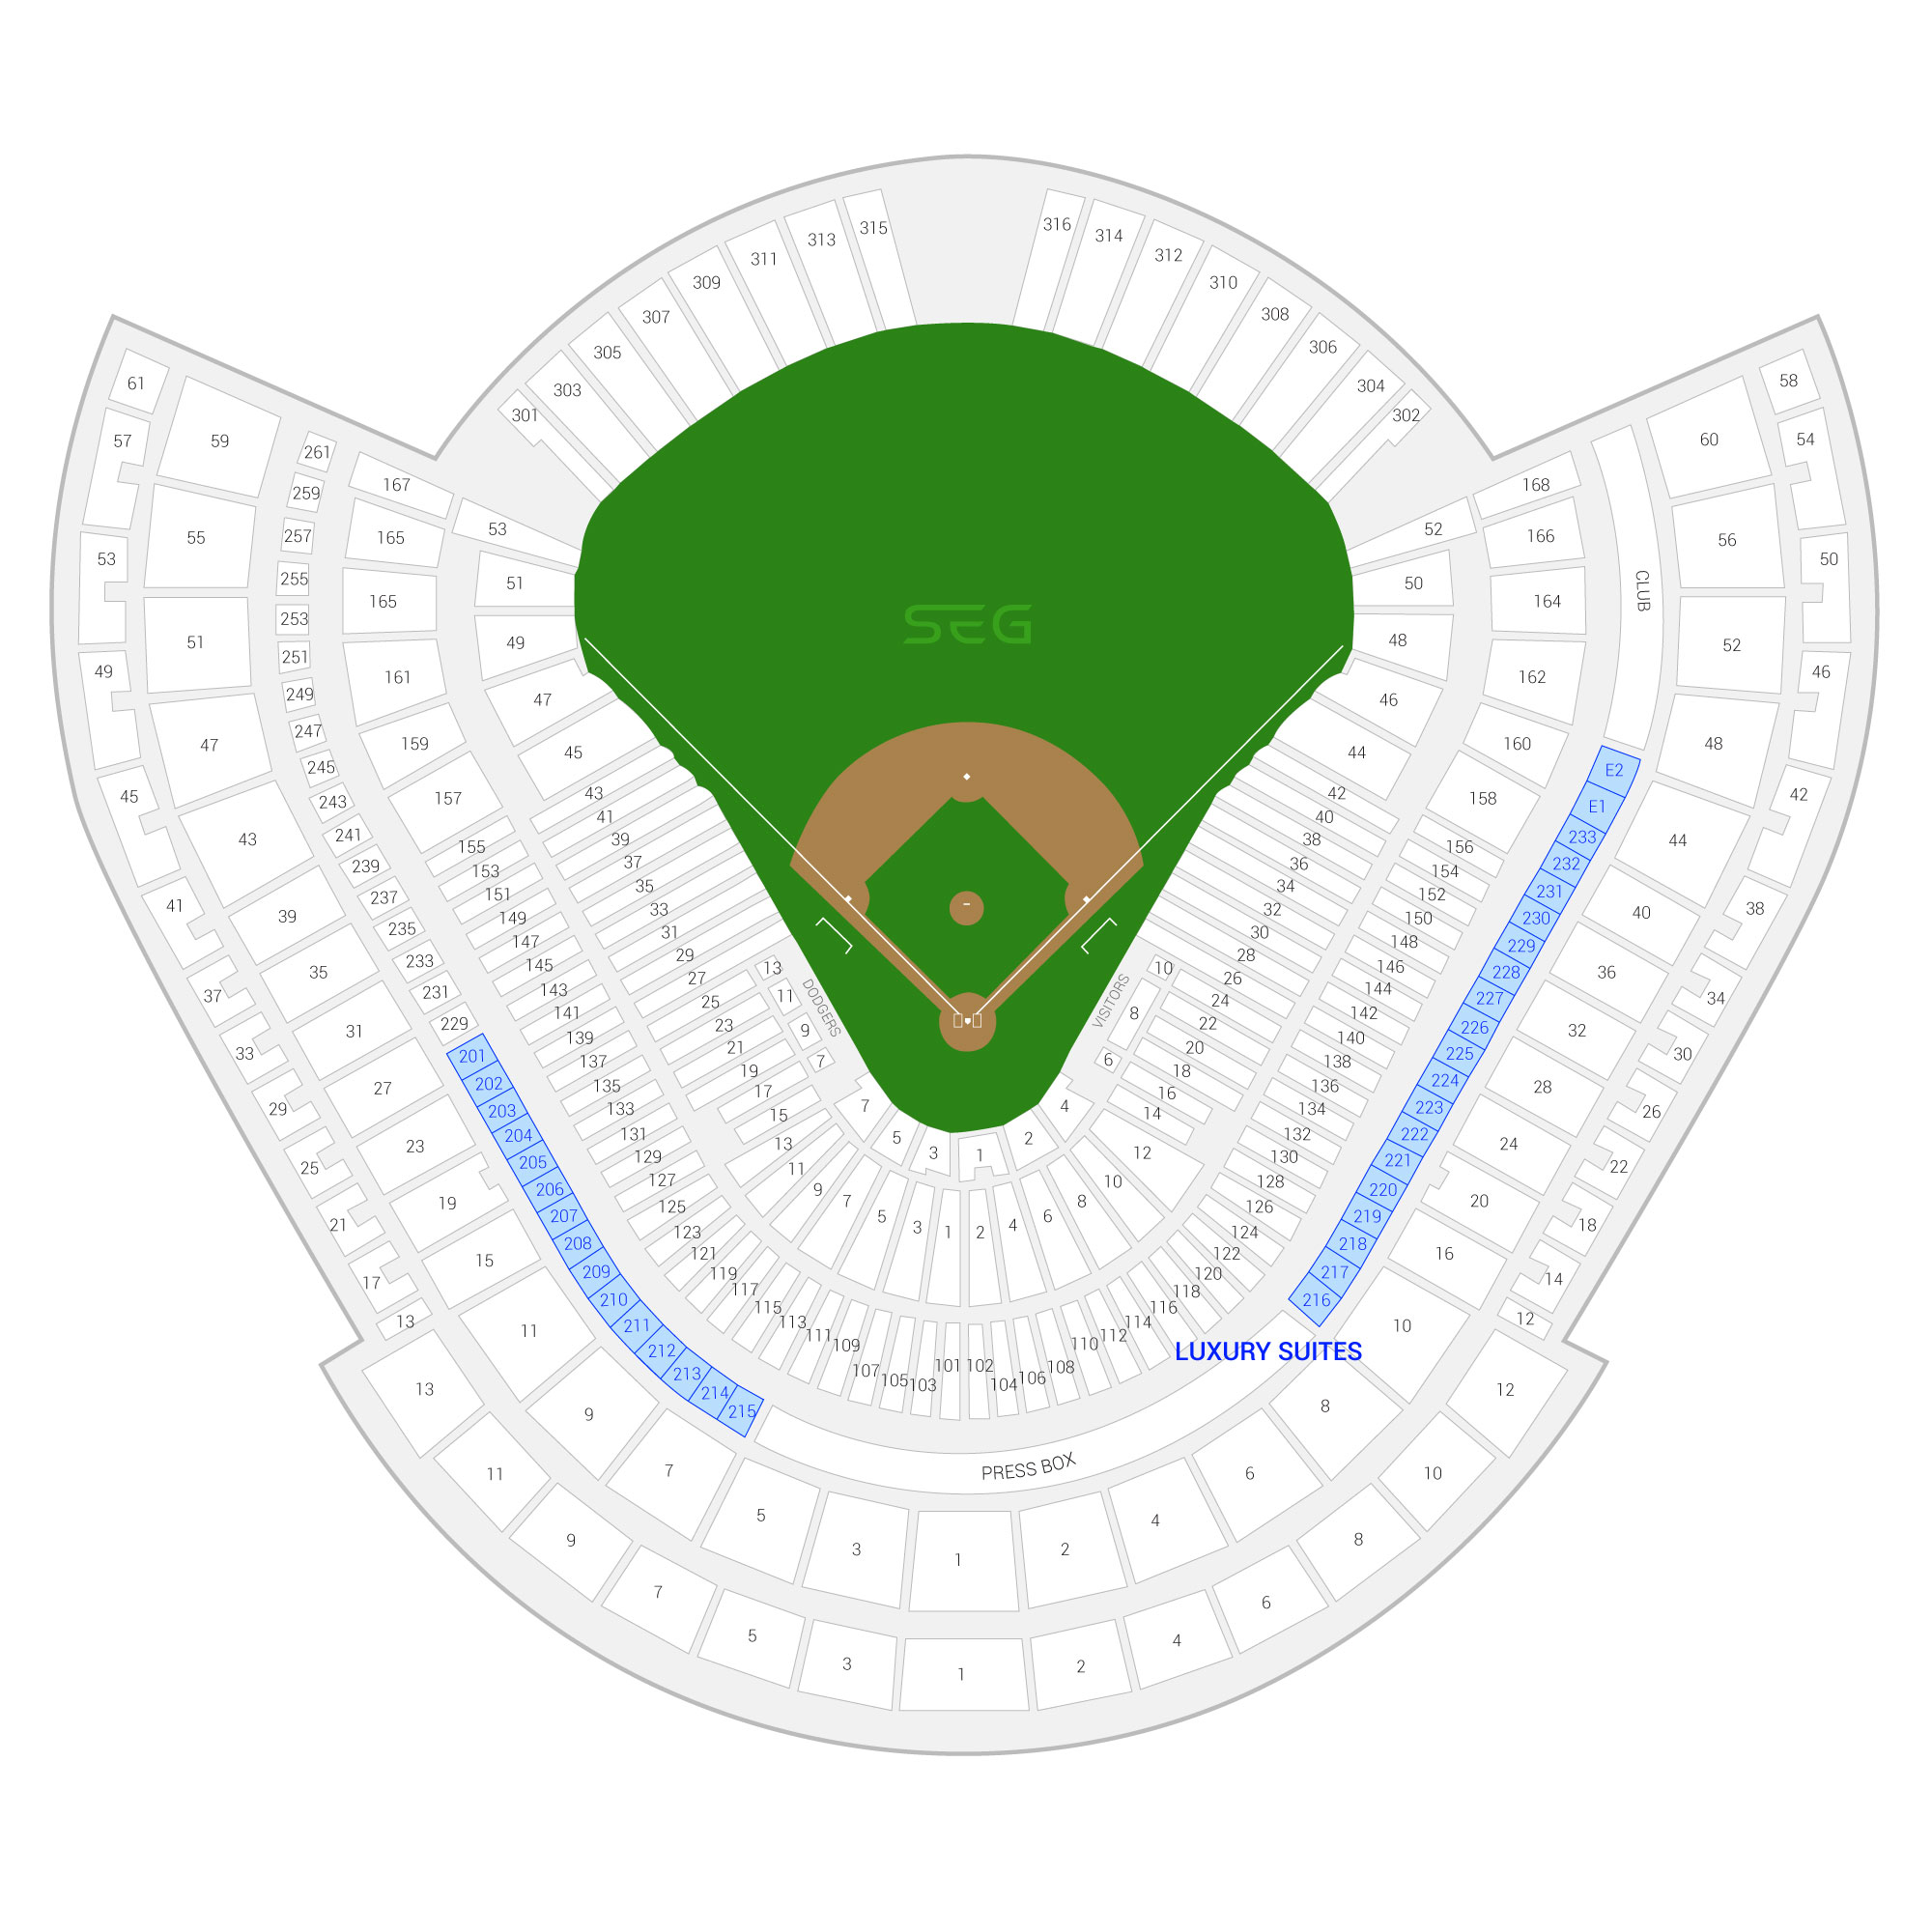 Dodger Stadium / Los Angeles Dodgers Suite Map and Seating Chart